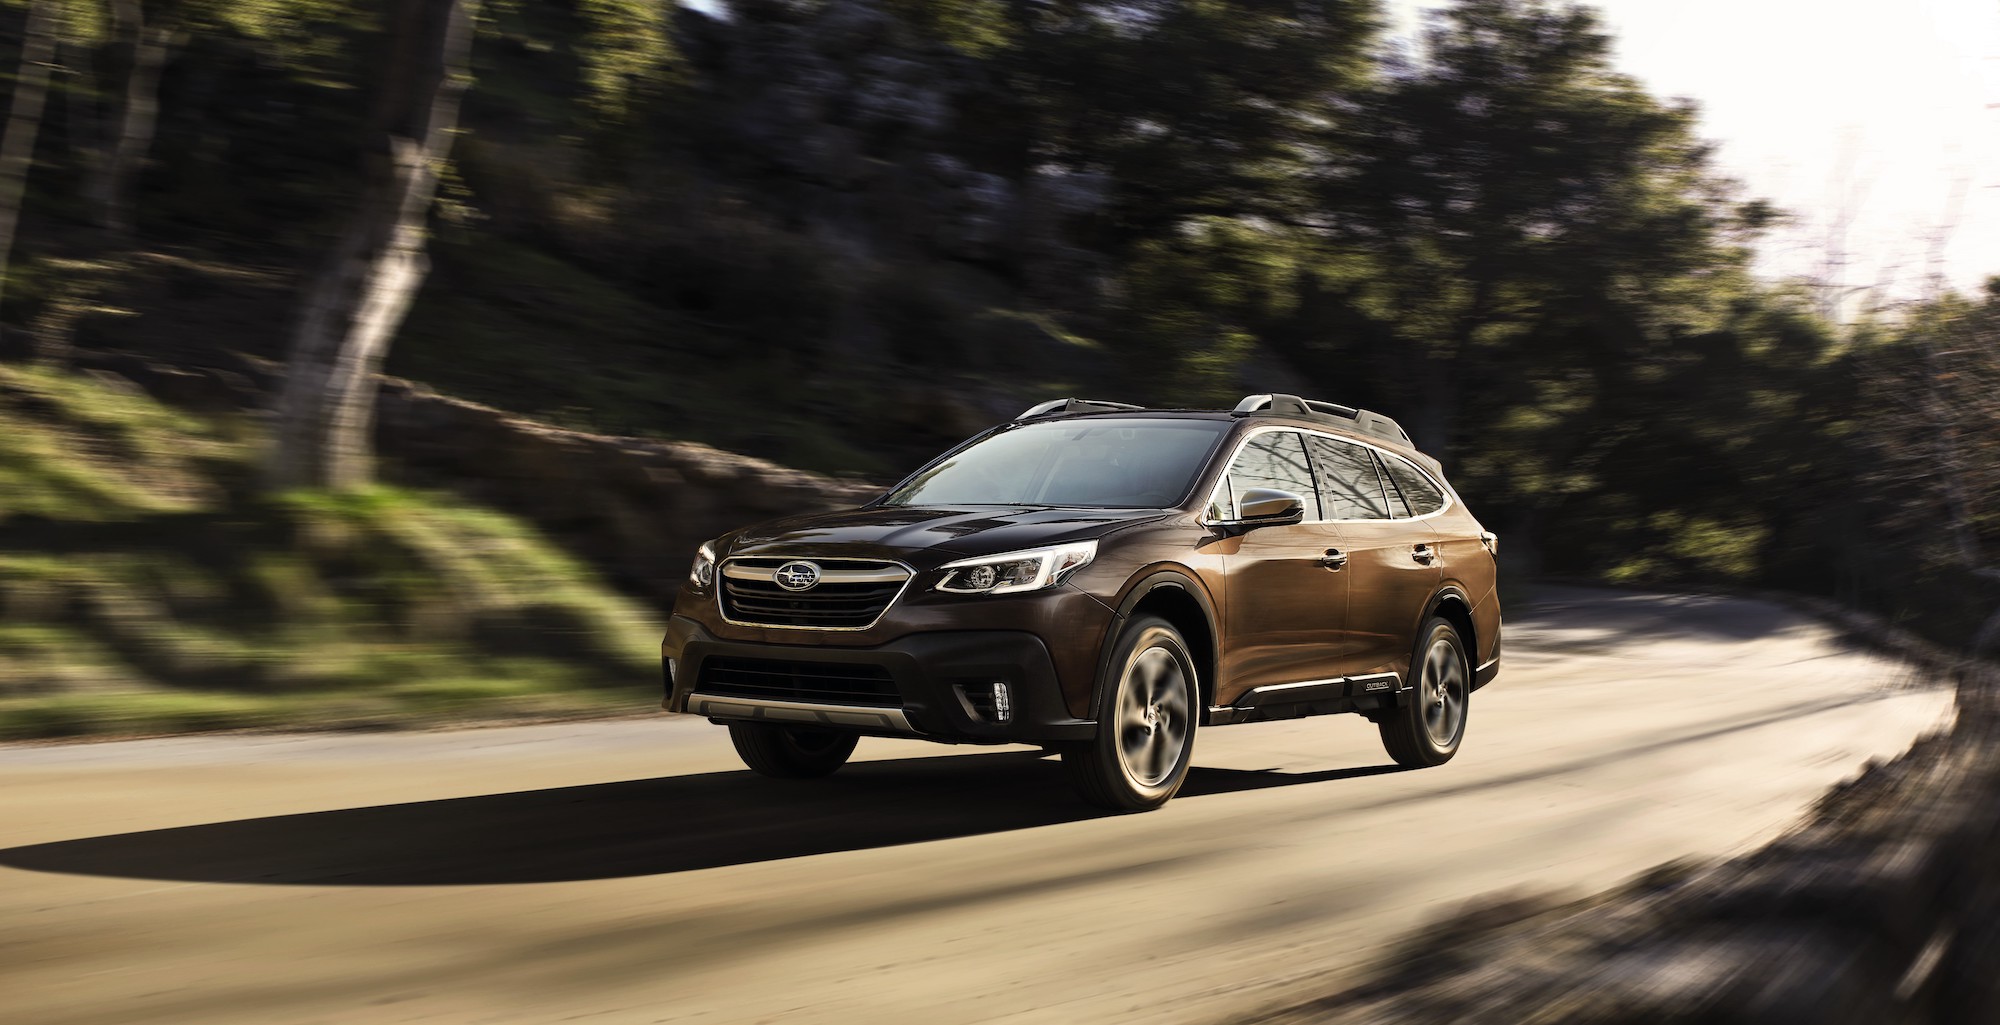 A dark-colored 2021 Subaru Outback midsize SUV traveling on country road through lush trees and green hills